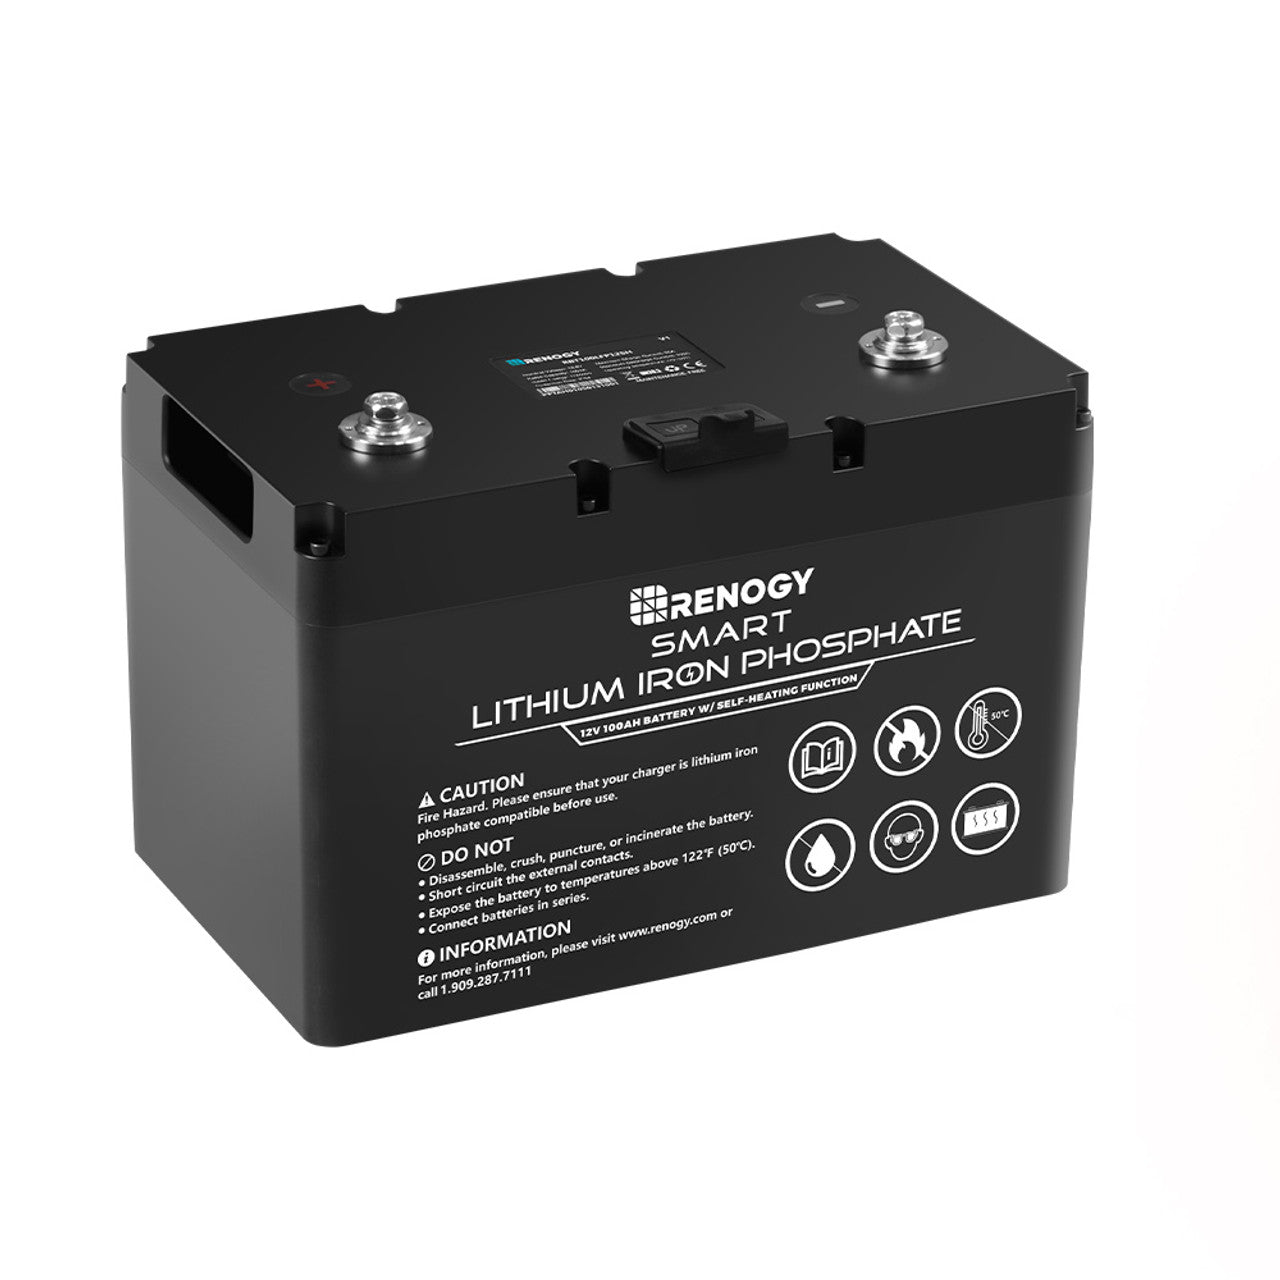 Smart Lithium Iron Phosphate Battery with Self-Heating Function